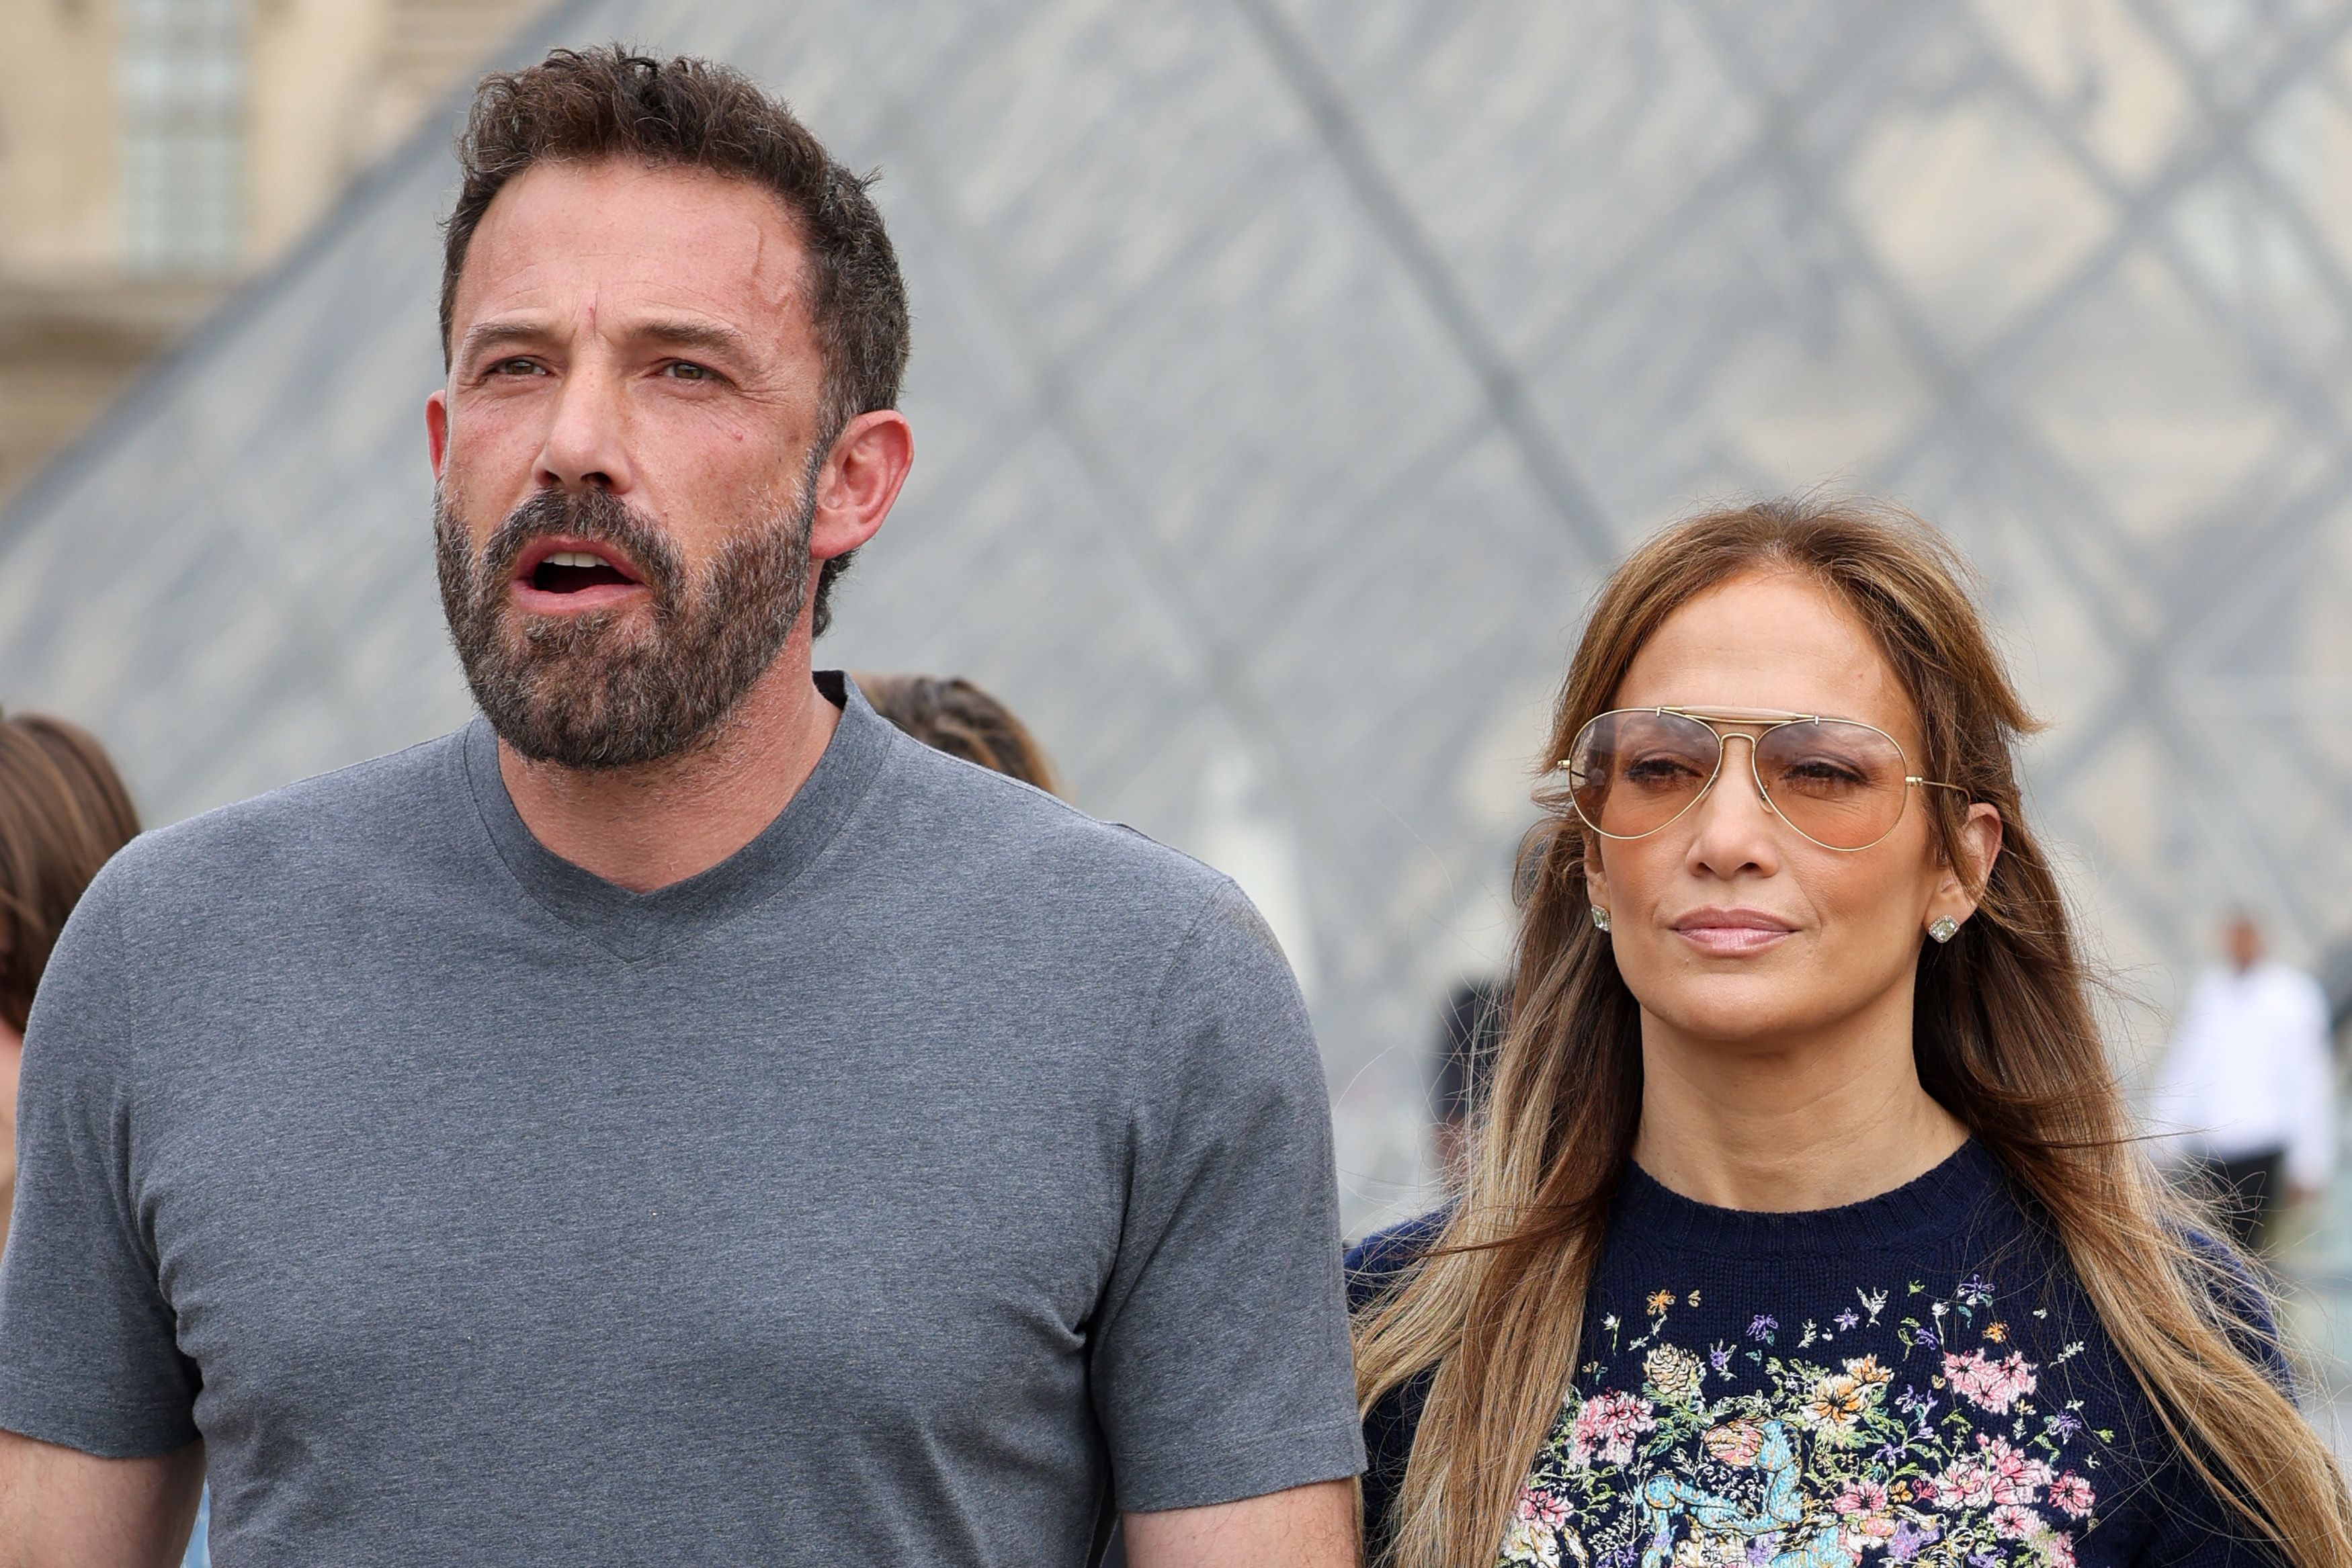 Jennifer Lopez and Ben Affleck at the Louvre Museum on July 26, 2022, in Paris, France | Source: Getty Images